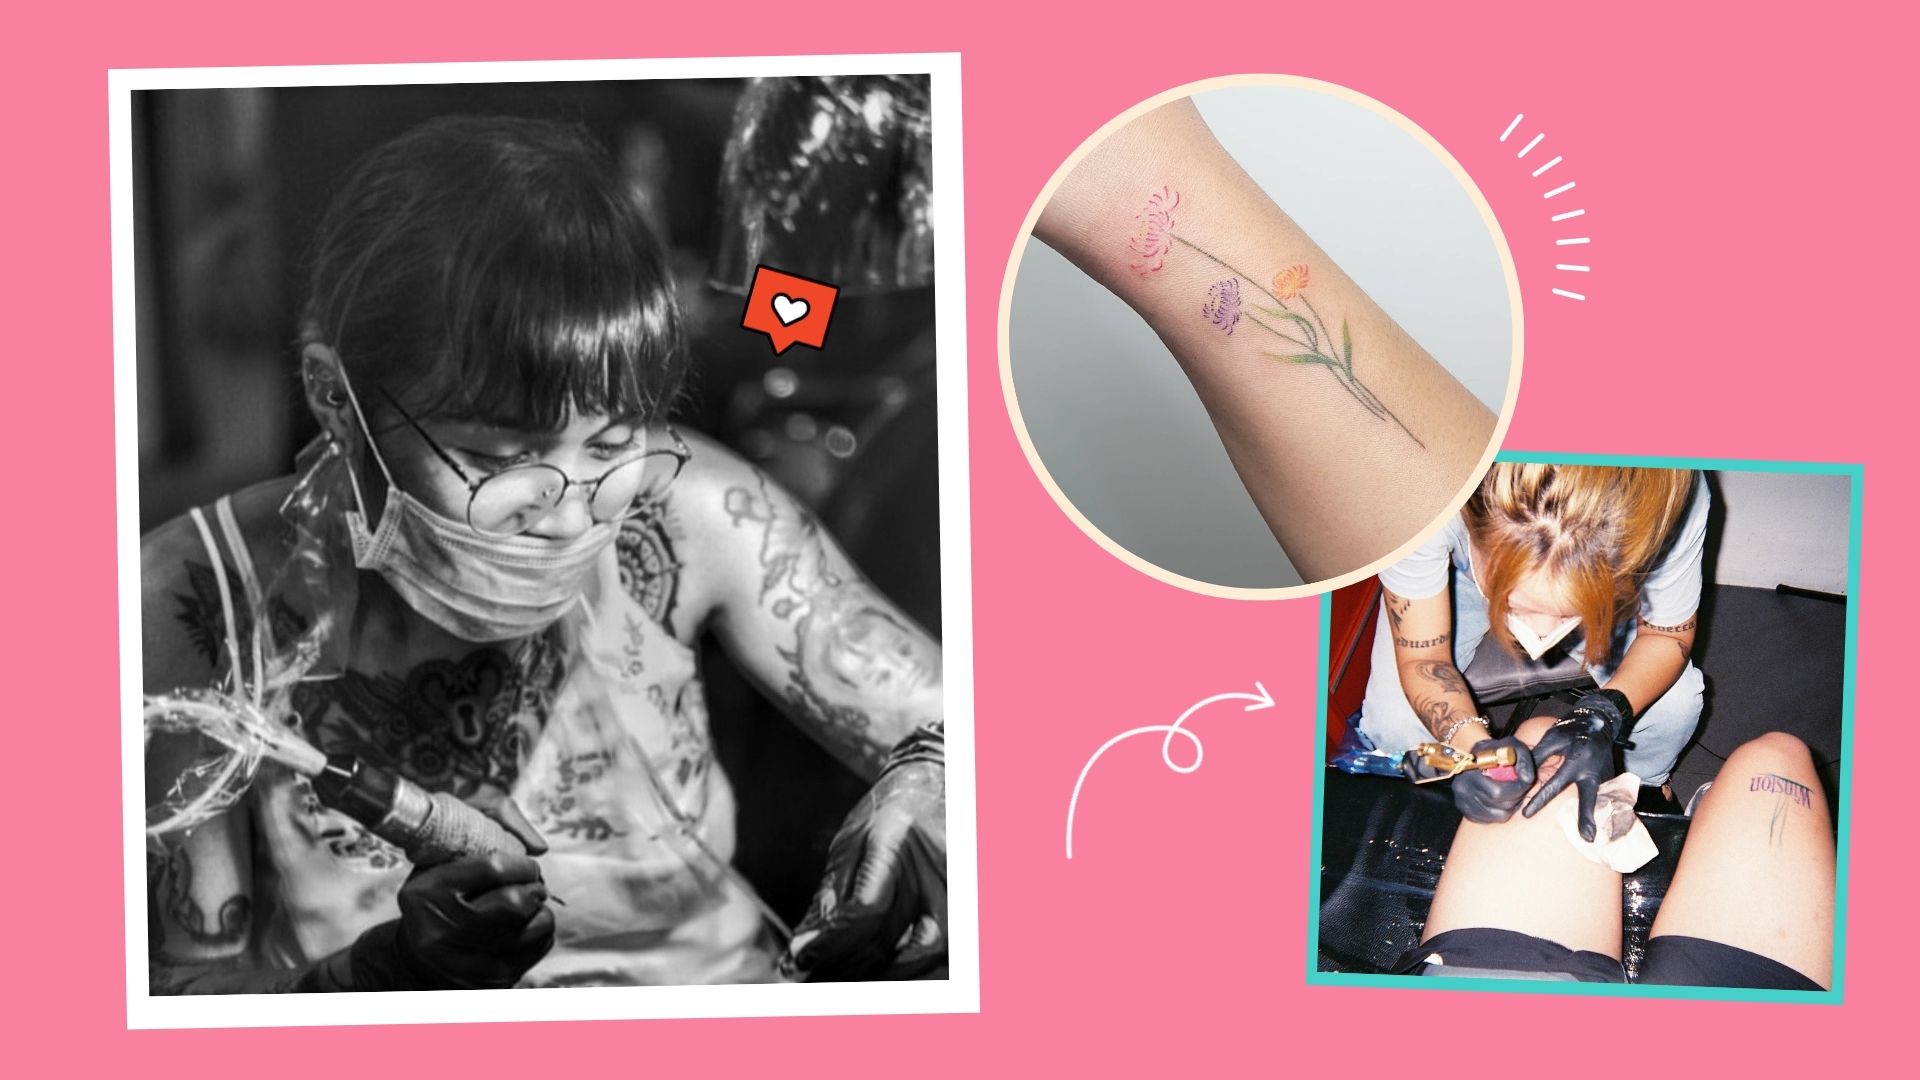 Pinays Share What It's Like To Be A Tattoo Artist | Cosmo.ph